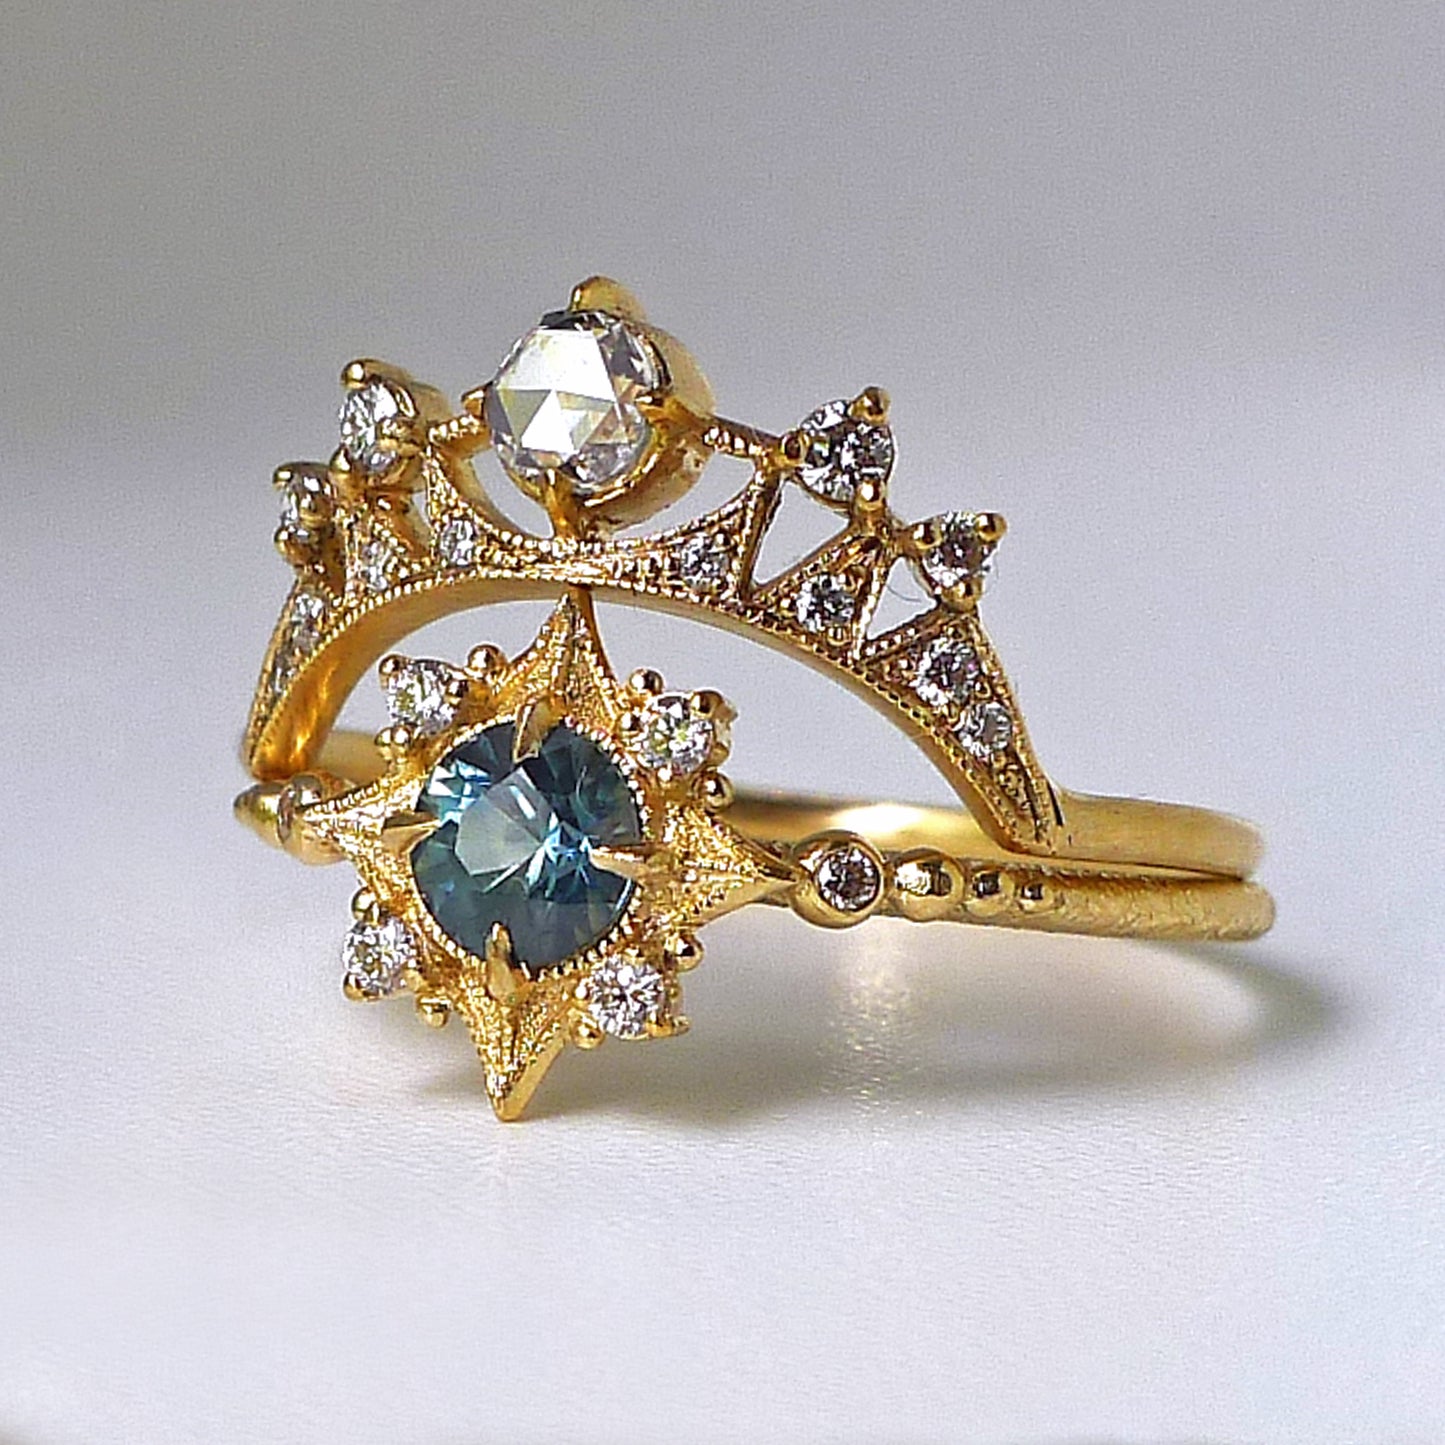 Load image into Gallery viewer, Astrid Luna Ring with Rose Cut Diamond
